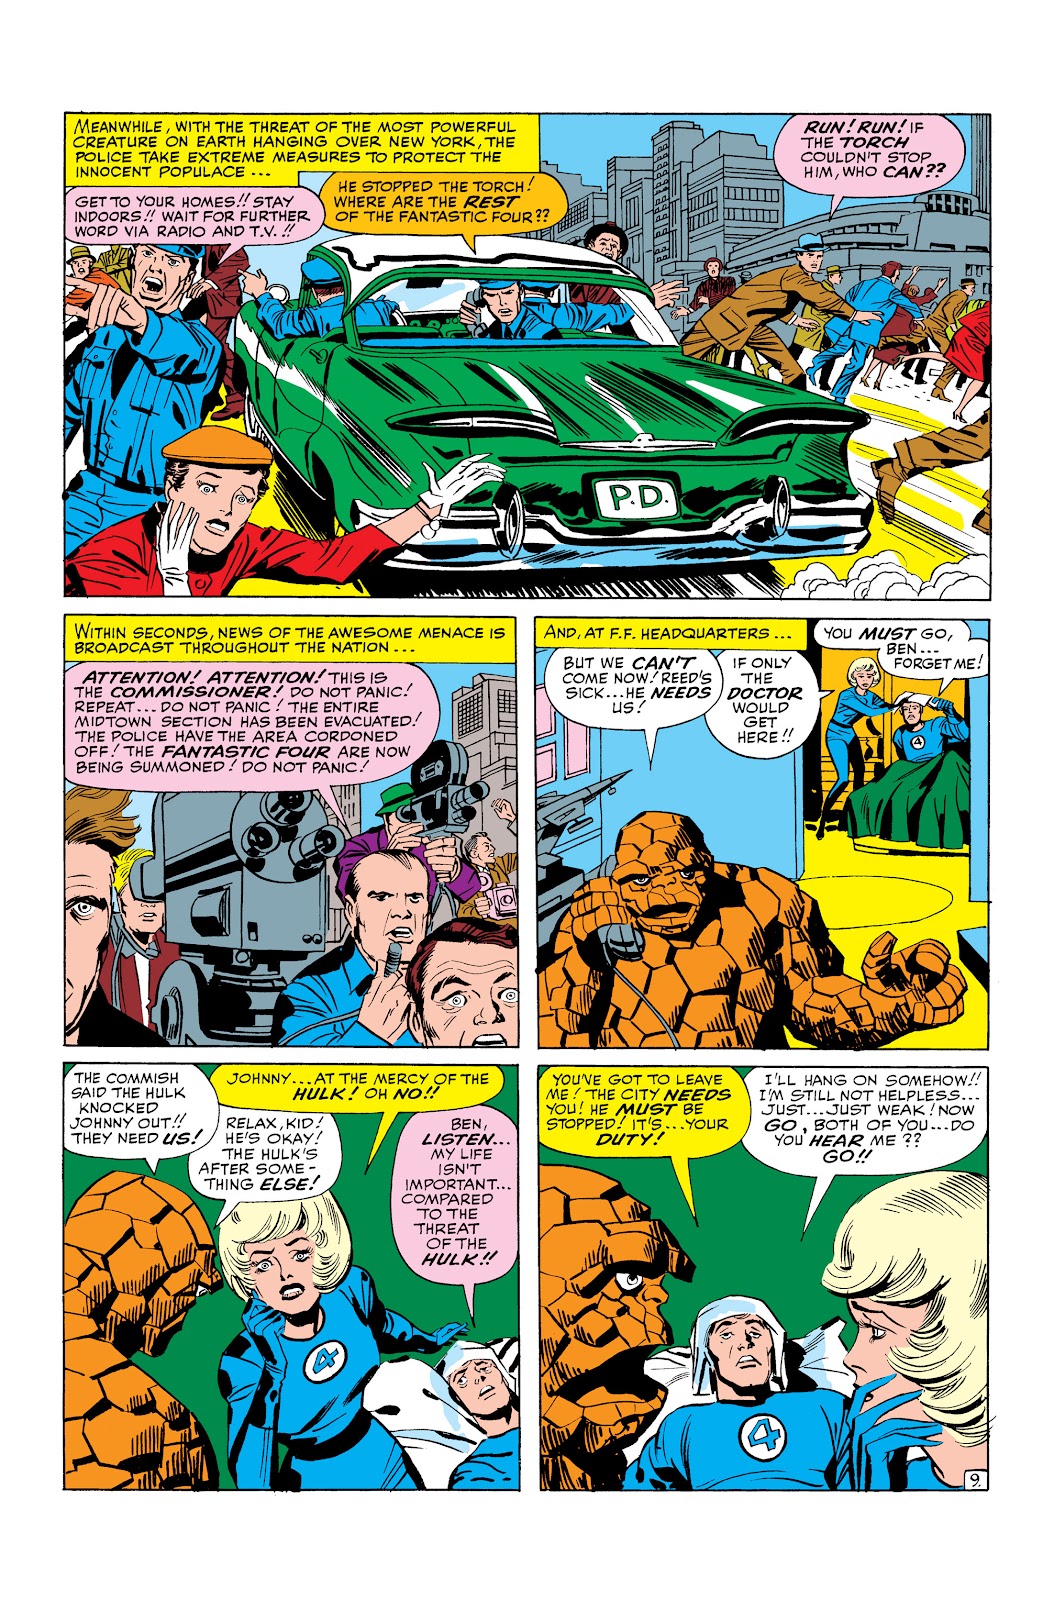 Read online Marvel Masterworks: The Fantastic Four comic - Issue # TPB 3 (Part 2) - 6